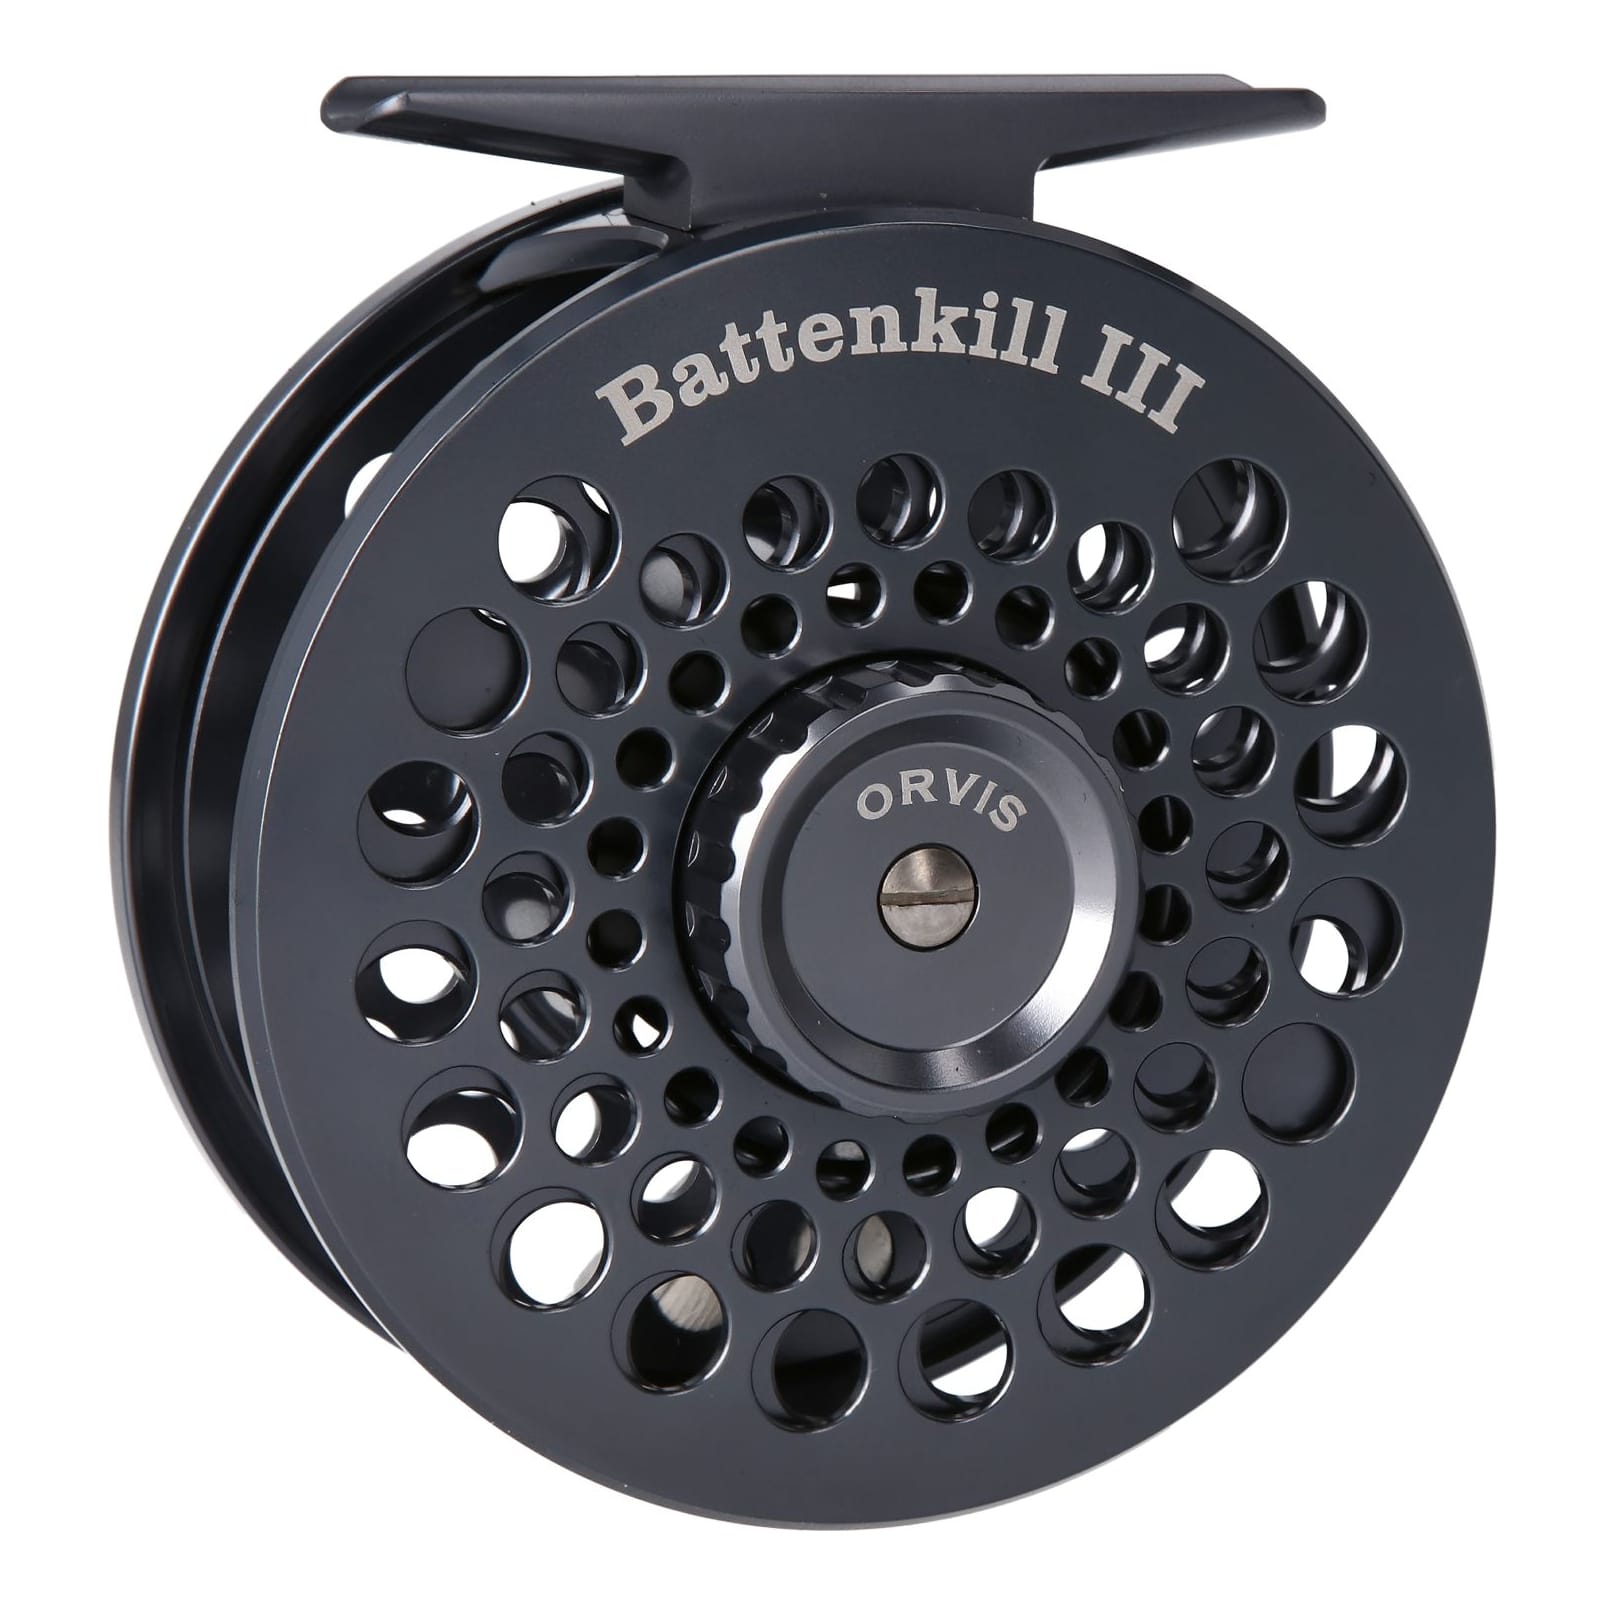 2 Orvis Battenkill Fly Reels in United States